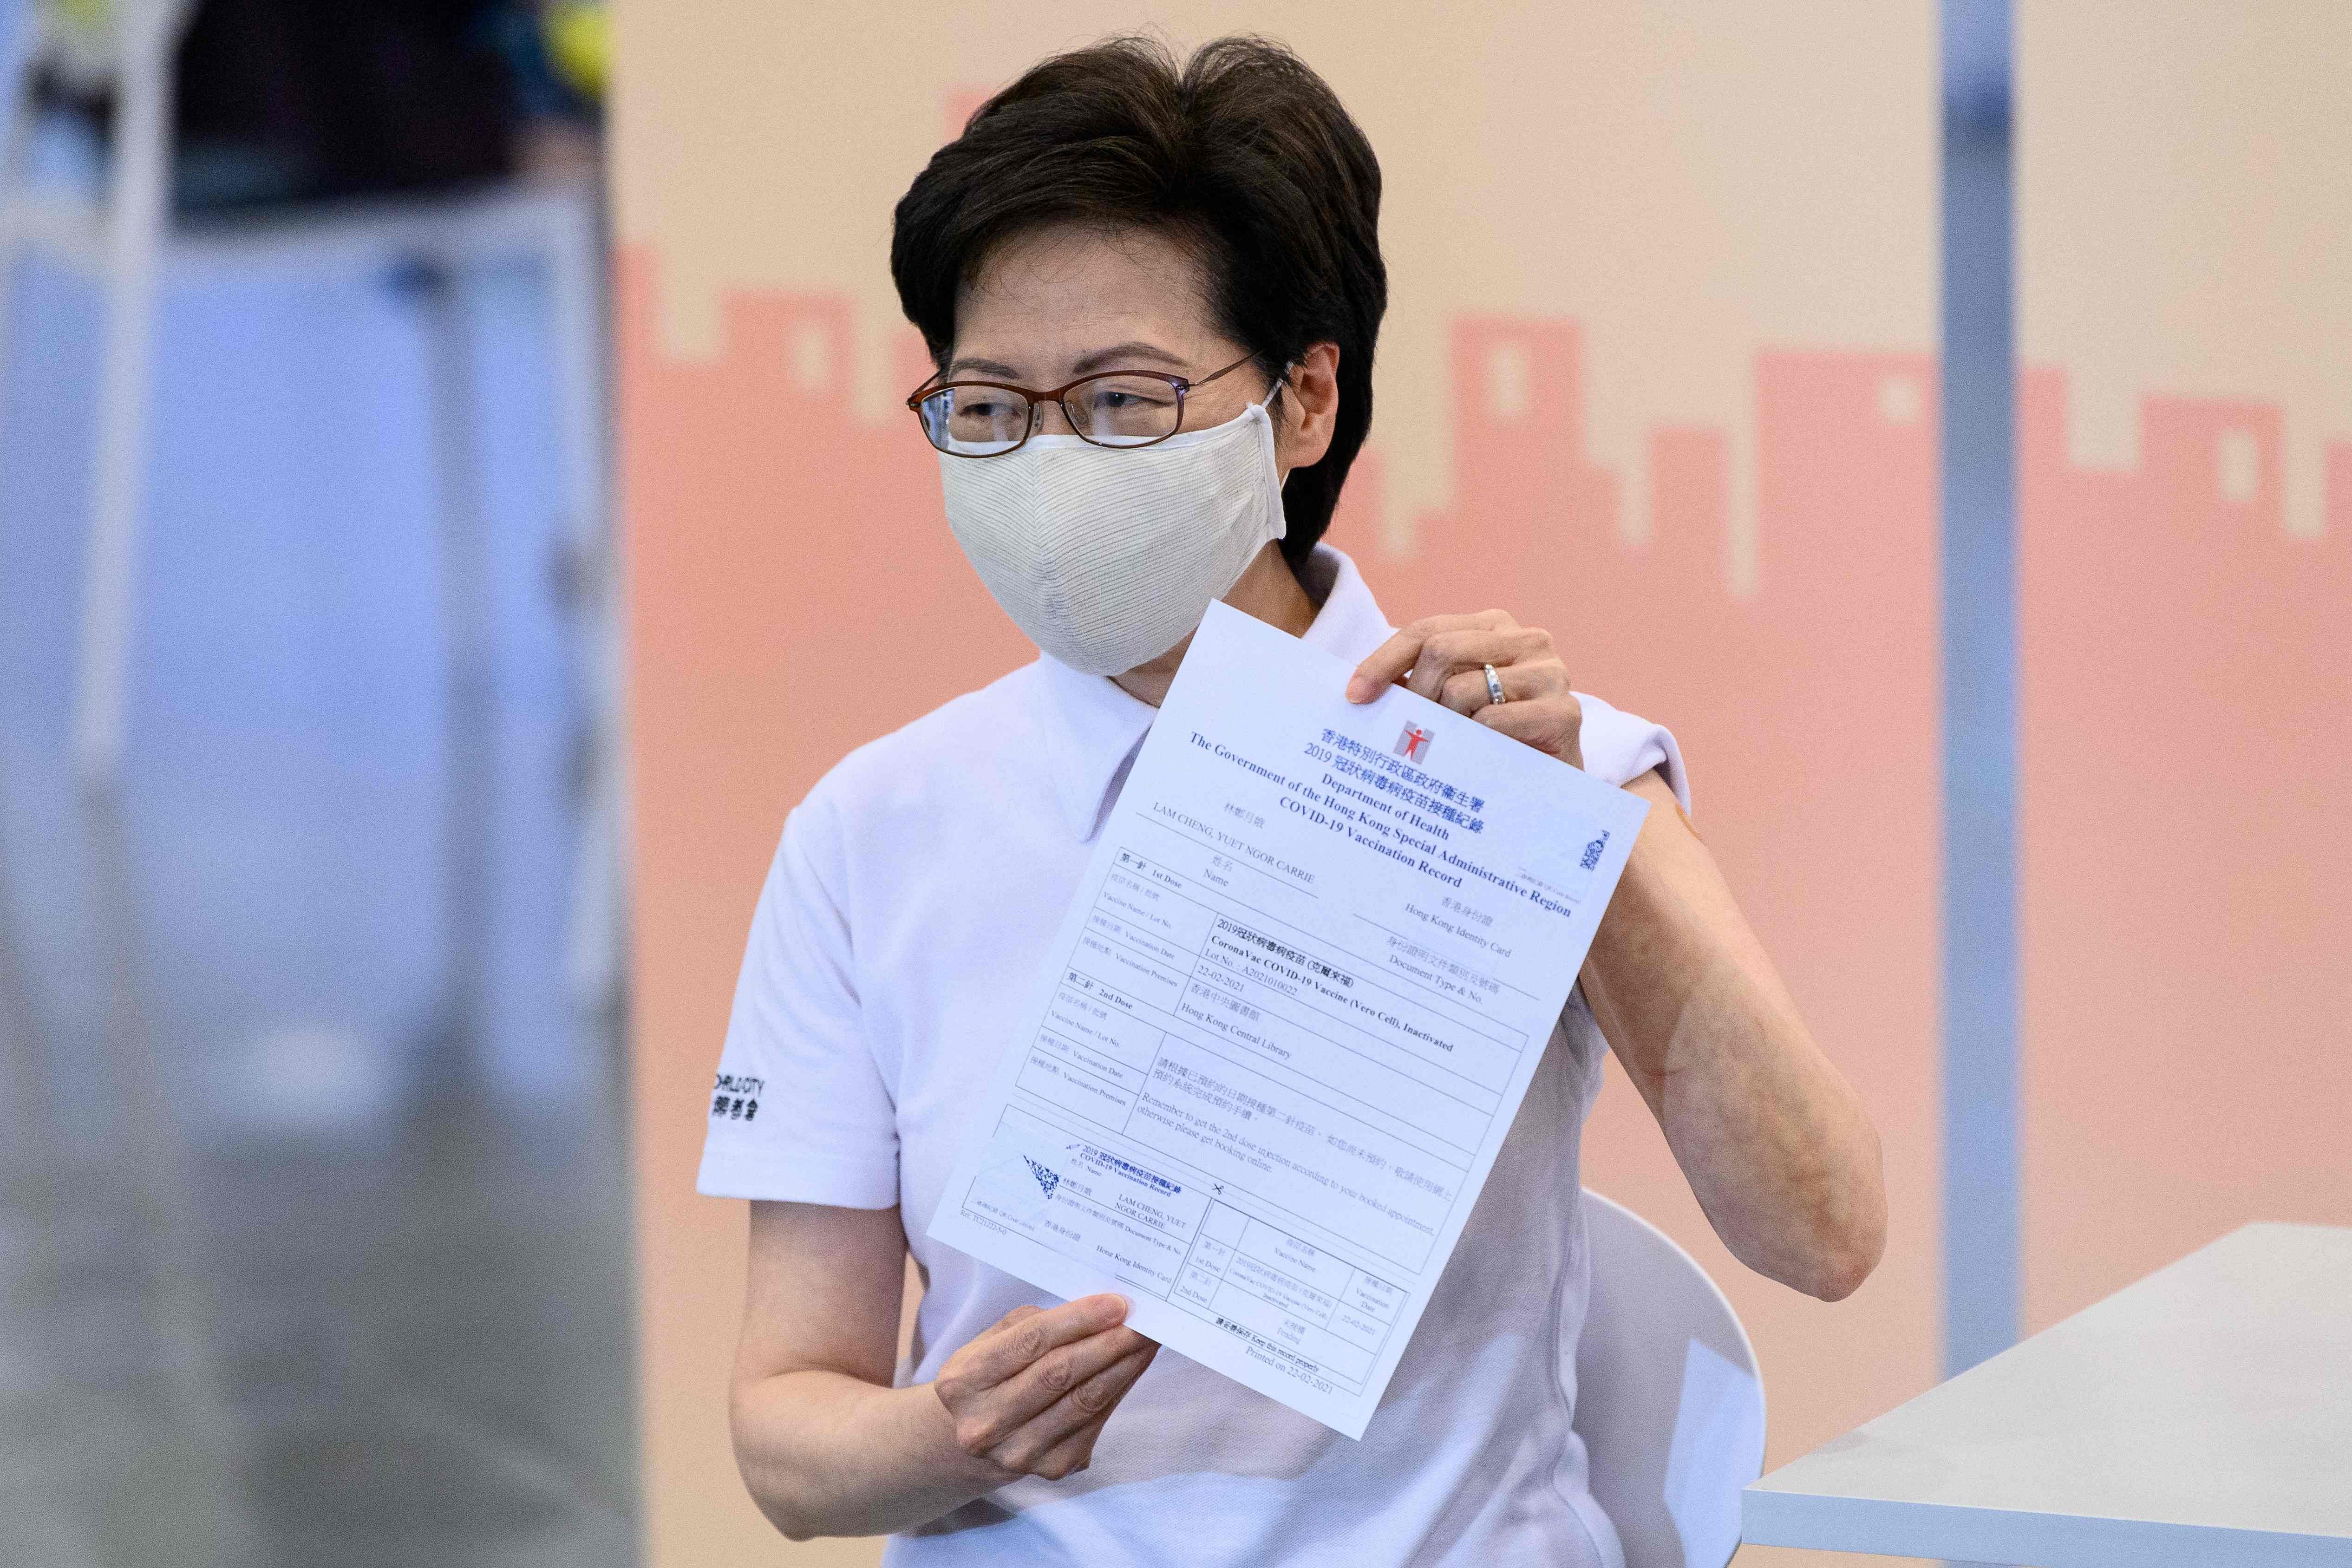 Hong Kong's Chief Executive Carrie Lam holds up a certificate after receiving China's Sinovac COVID-19 coronavirus vaccine at the Community Vaccination Centre in Hong Kong on February 22, 2021. Credit: AFP Photo